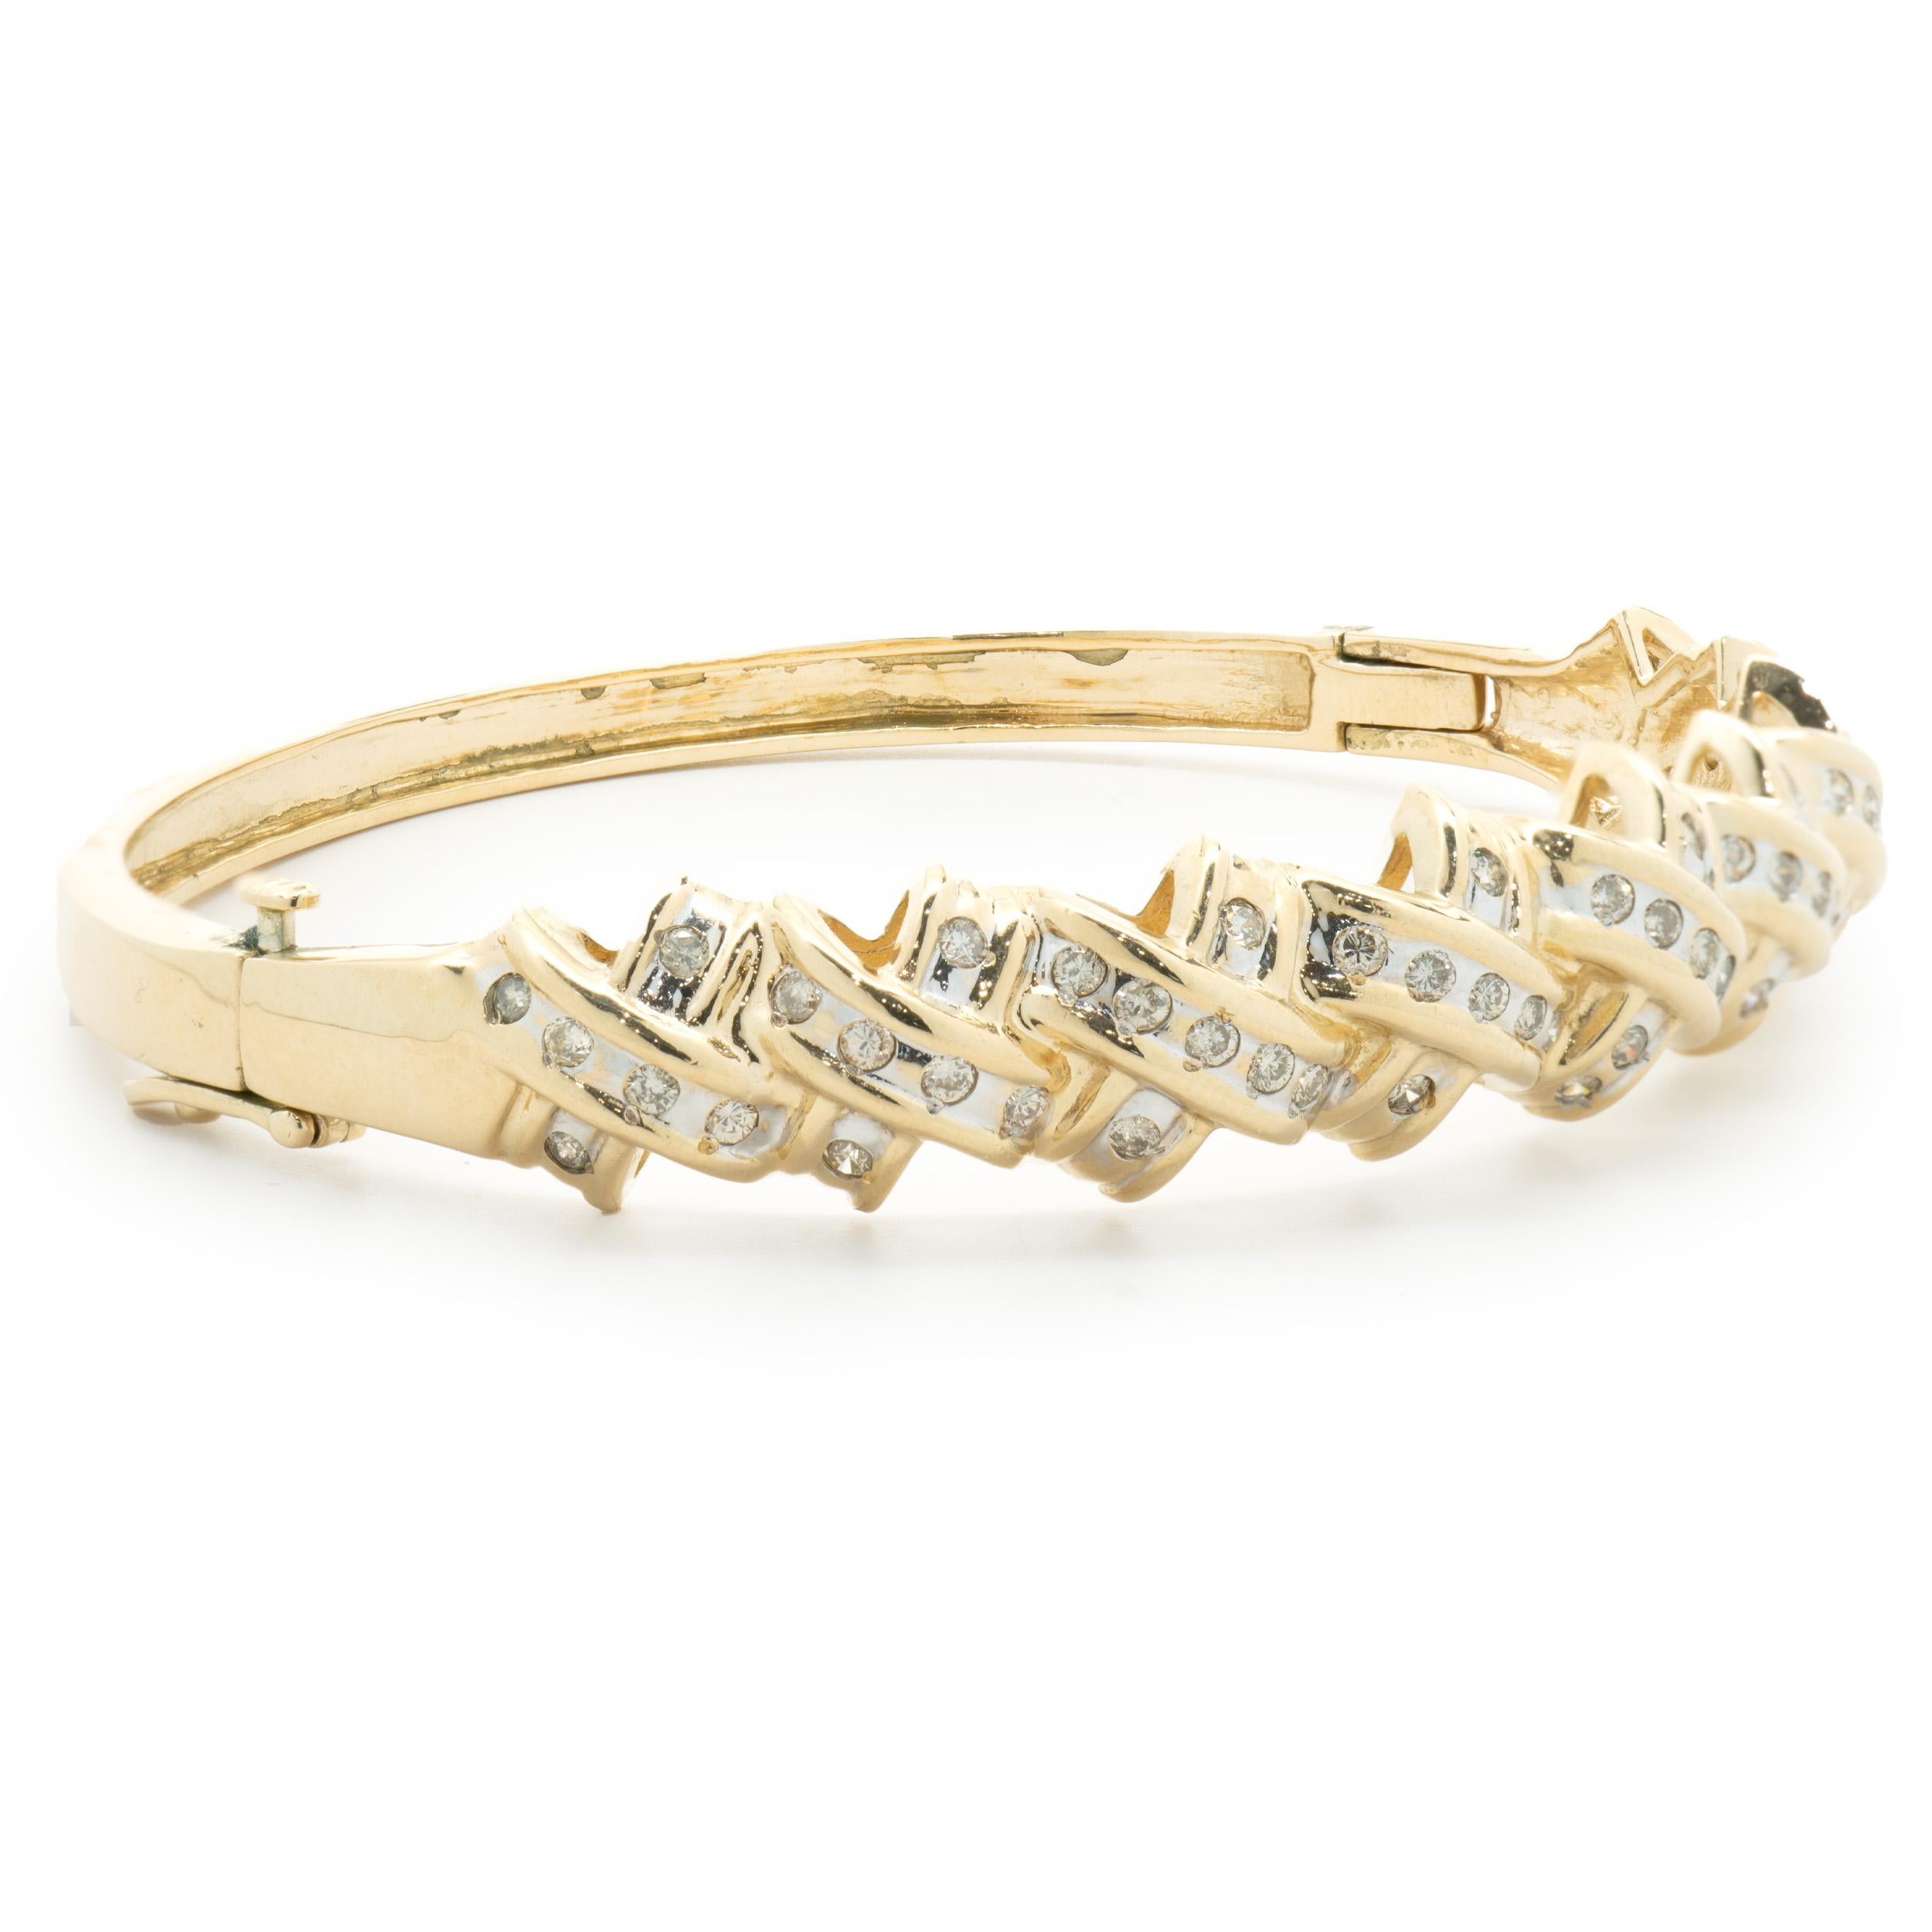 Designer: custom design
Material: 14K yellow gold
Diamonds: 54 round brilliant cut = 0.54cttw
Color: H
Clarity: SI2
Dimensions: bracelet will fit up to a 6.5-inch wrist
Weight: 21.88 grams